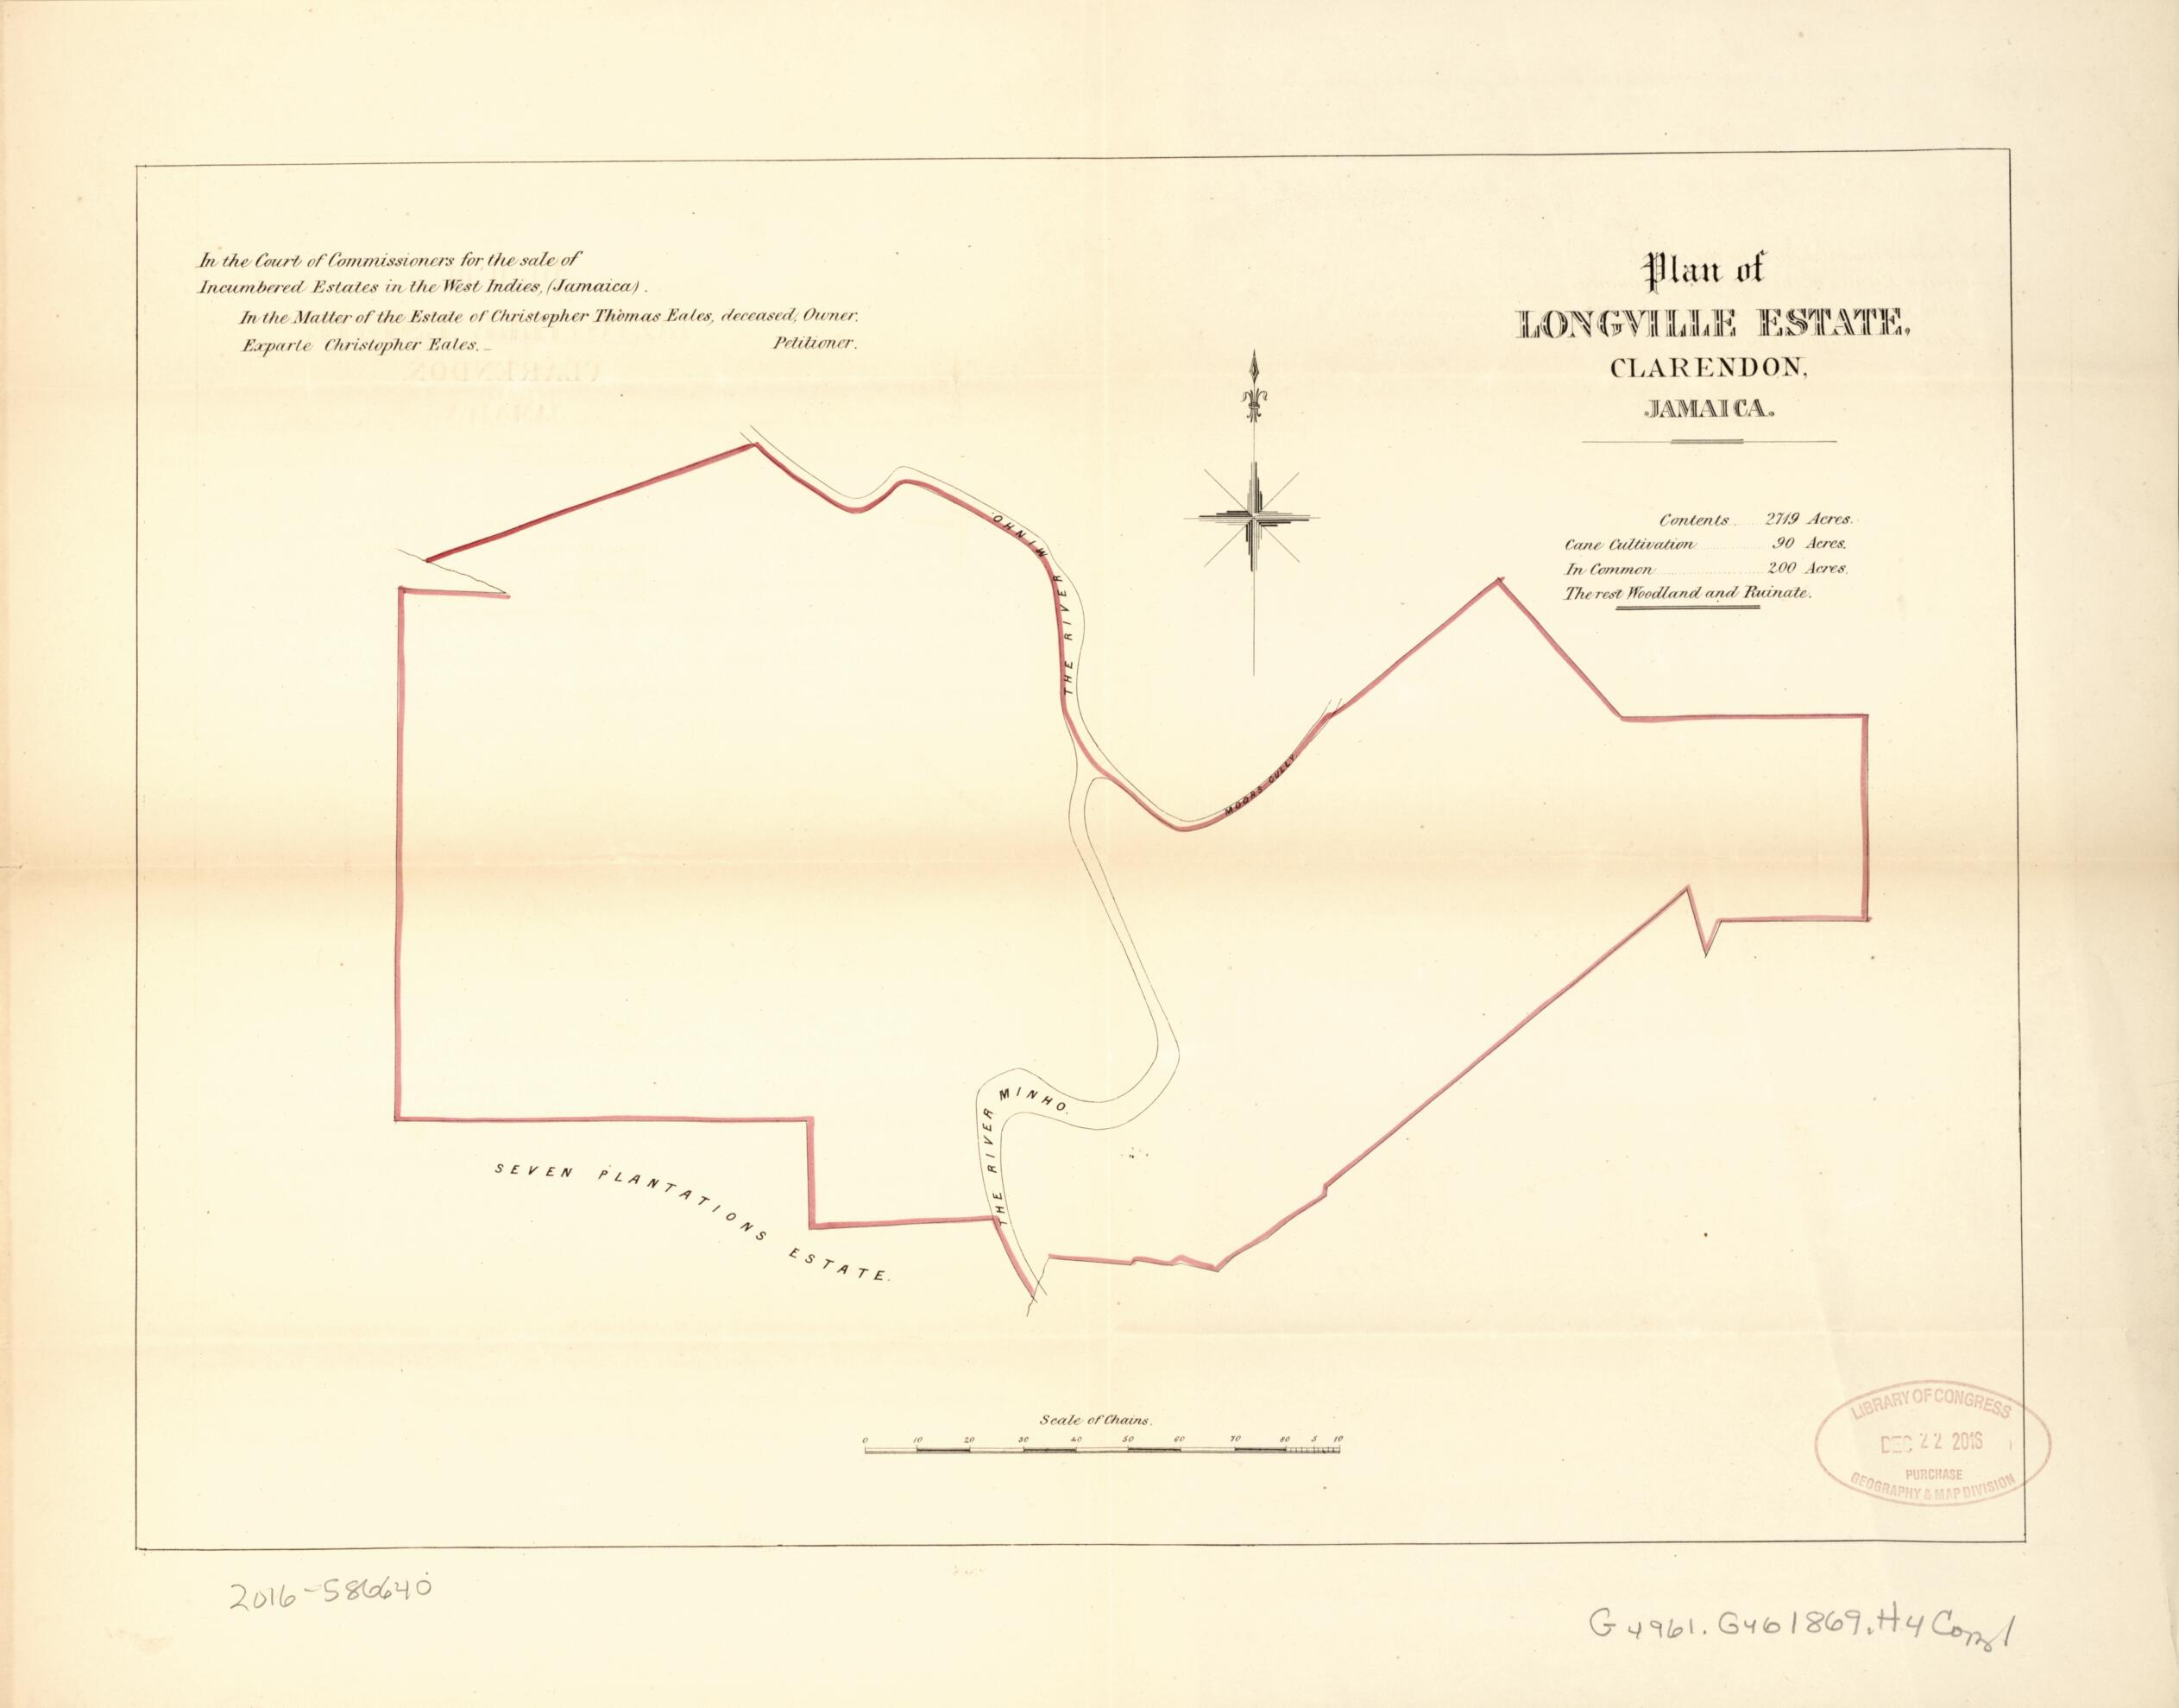 This old map of Plan of Longville Estate from Encumbered Estates In the West Indies (Jamaica) from 1869 was created by Vaughan &amp; Leifchild (Firm) Hards in 1869